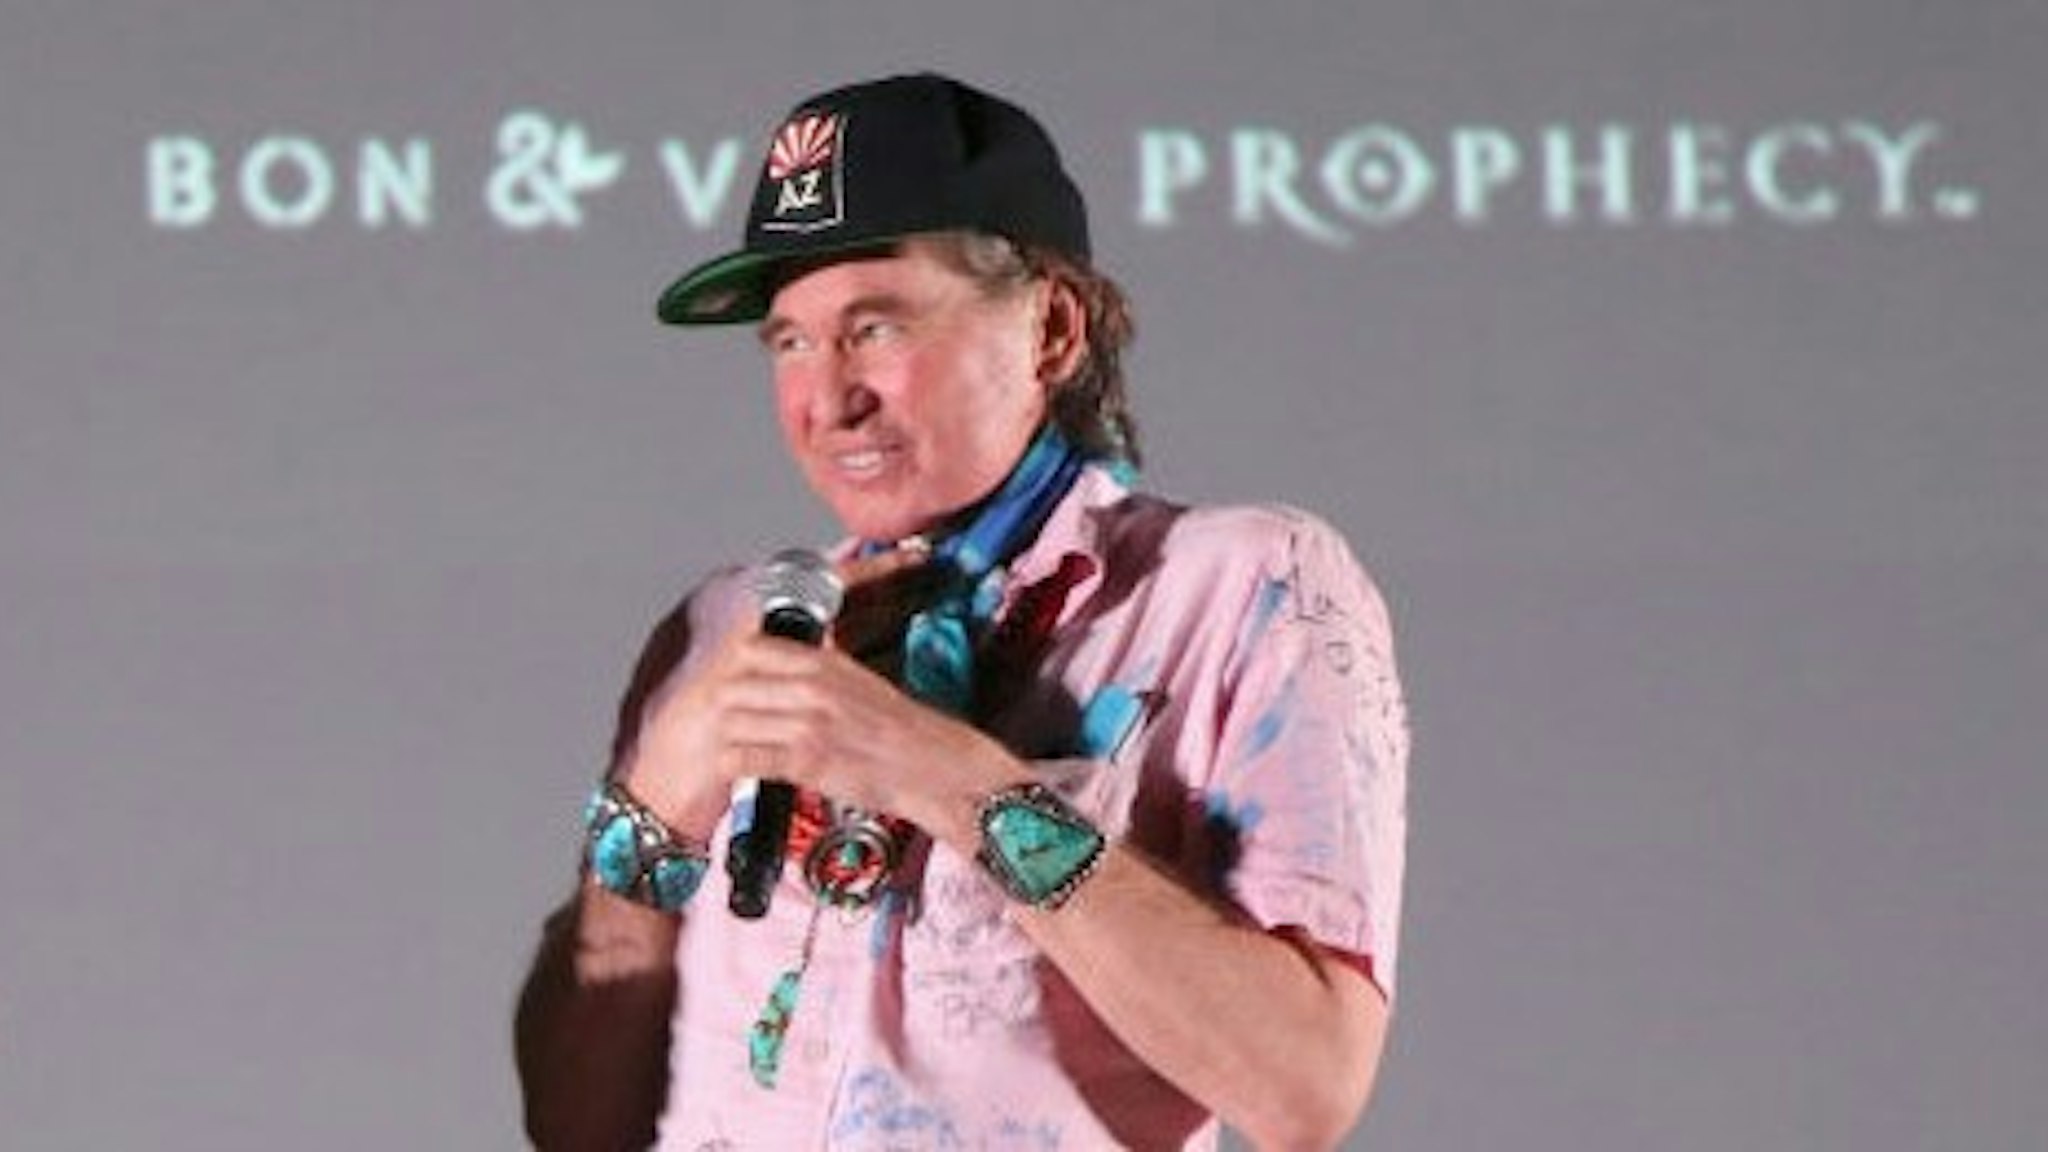 AUSTIN, TEXAS - SEPTEMBER 01: Val Kilmer who played Iceman and Barry Tubb who played Wolfman in the film, introduce a special screening of Top Gun at Camp Mabry on September 1, 2019 in Austin, Texas. (Photo by